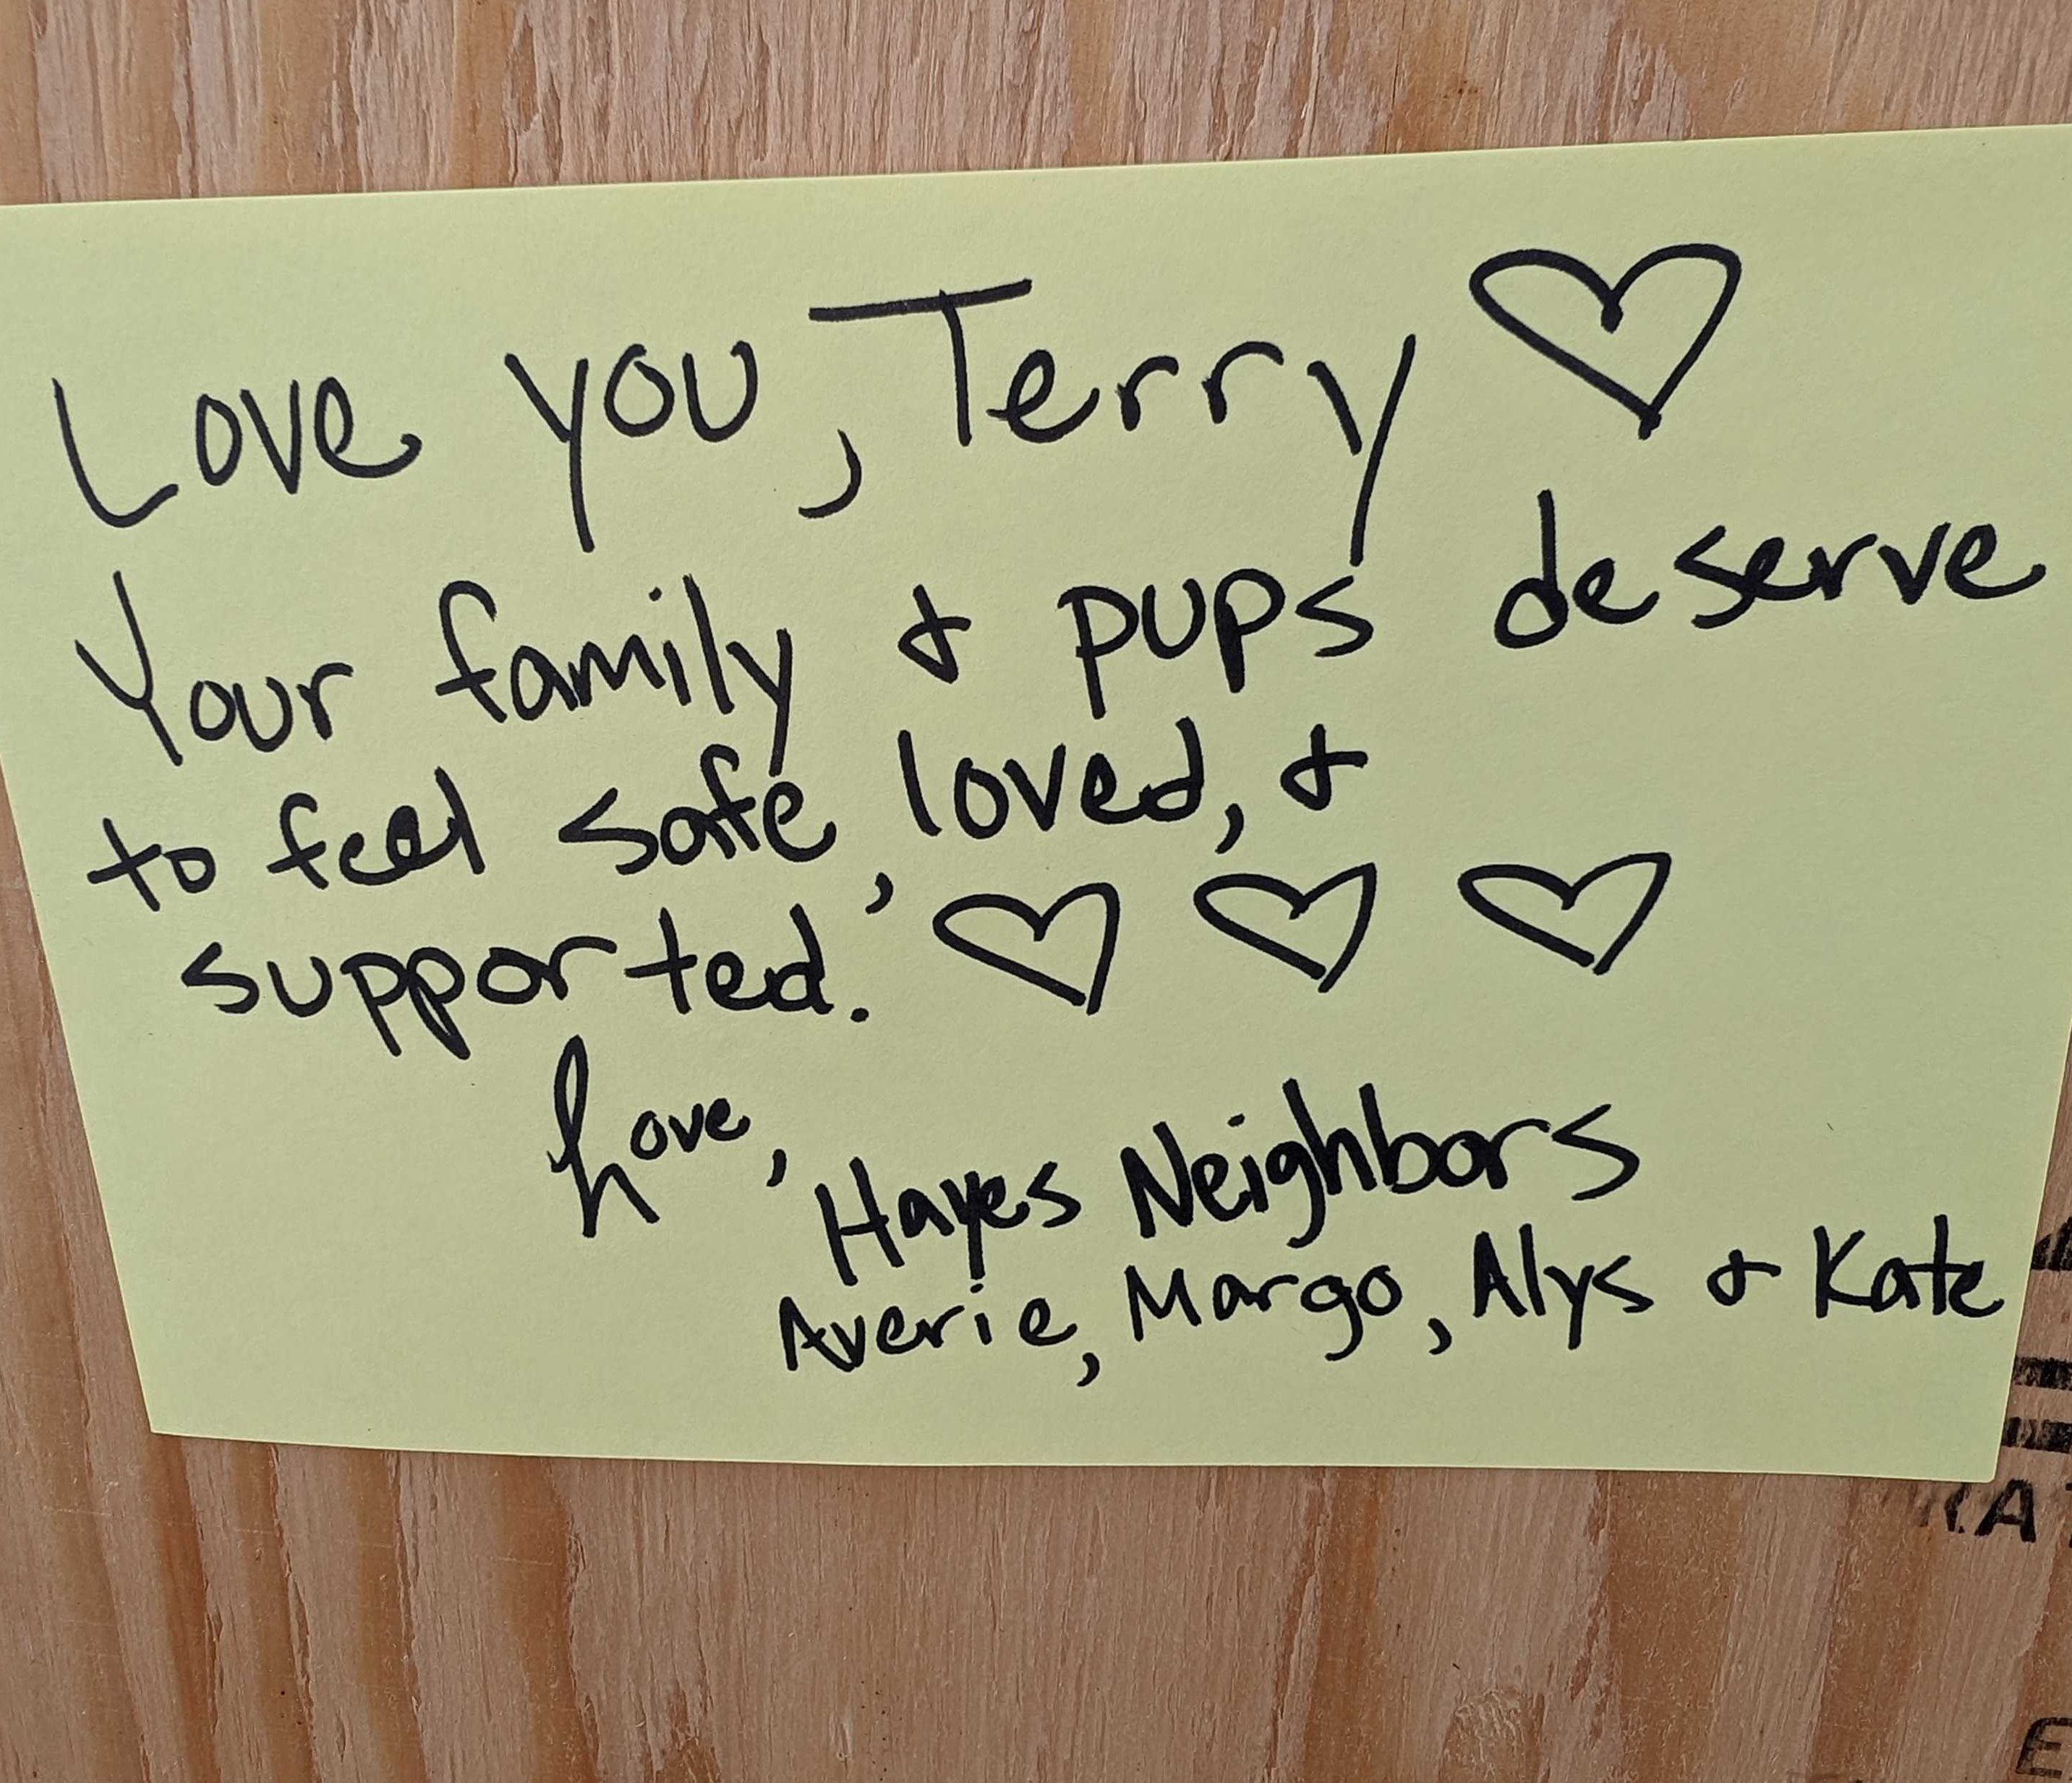 A handwritten note on yellow paper says, &quot;Love you, Terry. Your family &amp; pups deserve to feel safe, loved, &amp; supported.&quot; It's signed by Hayes Neighbors with drawn hearts.